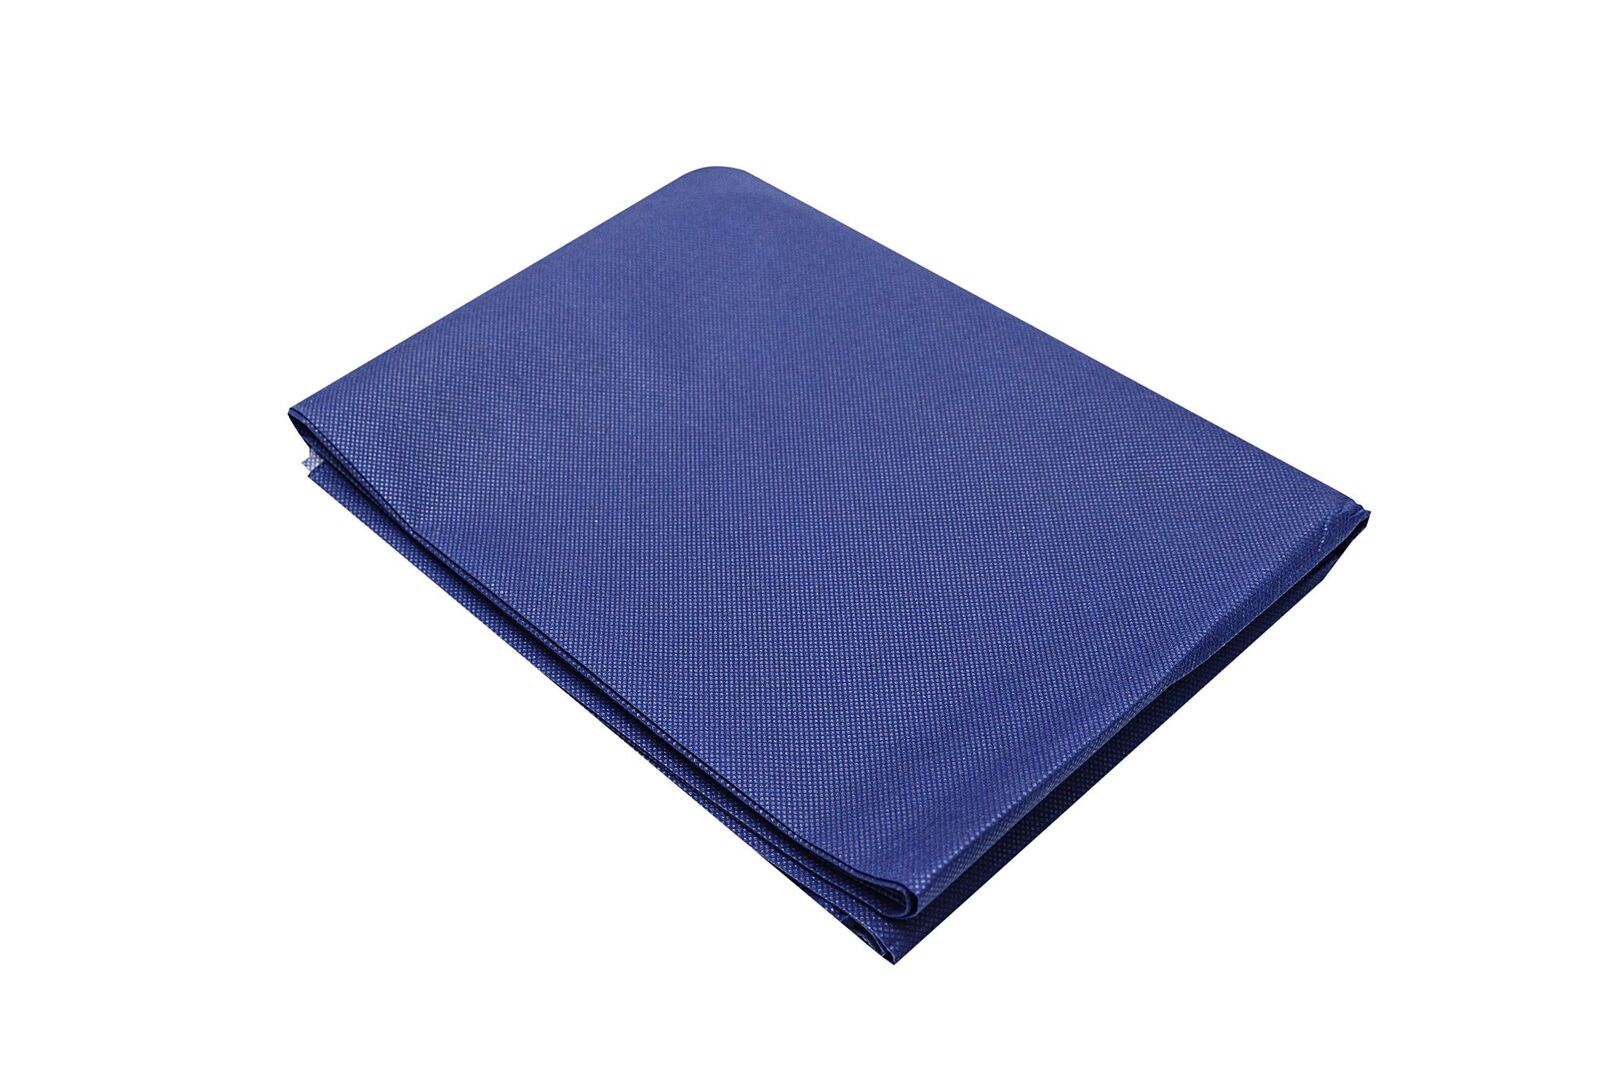 200 x 100cm, 100Stück/VE 
60 g/m² PP-fleece, 35 g/m² PE,
extra strong

10 pieces packed in a polyback